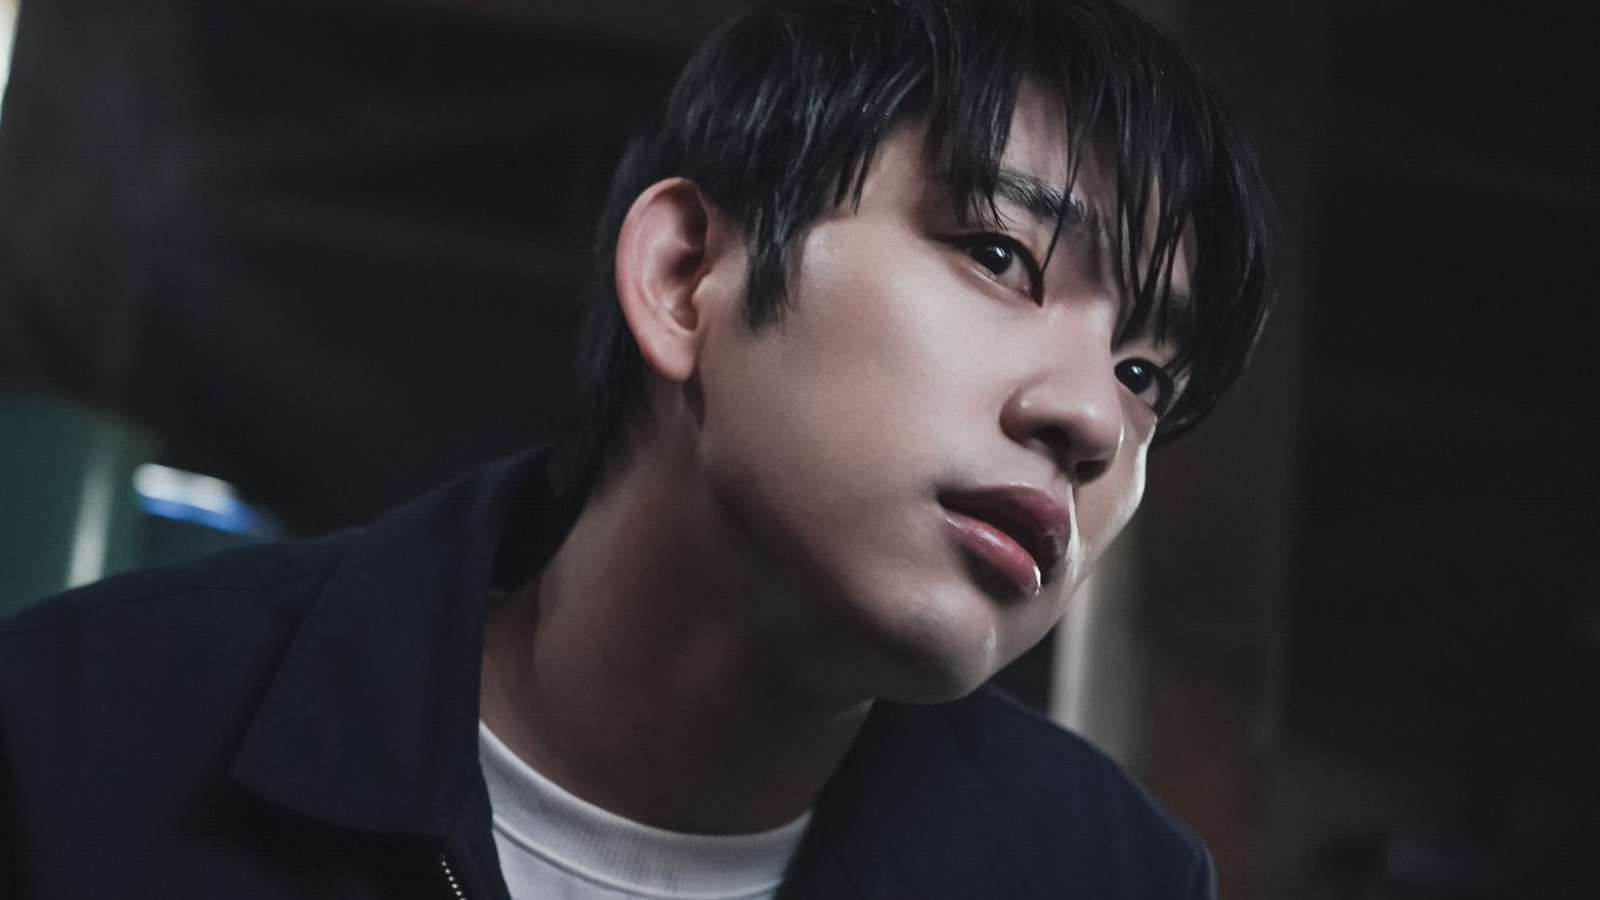 JinYoung in Chicken Nugget K-drama for Netflix.